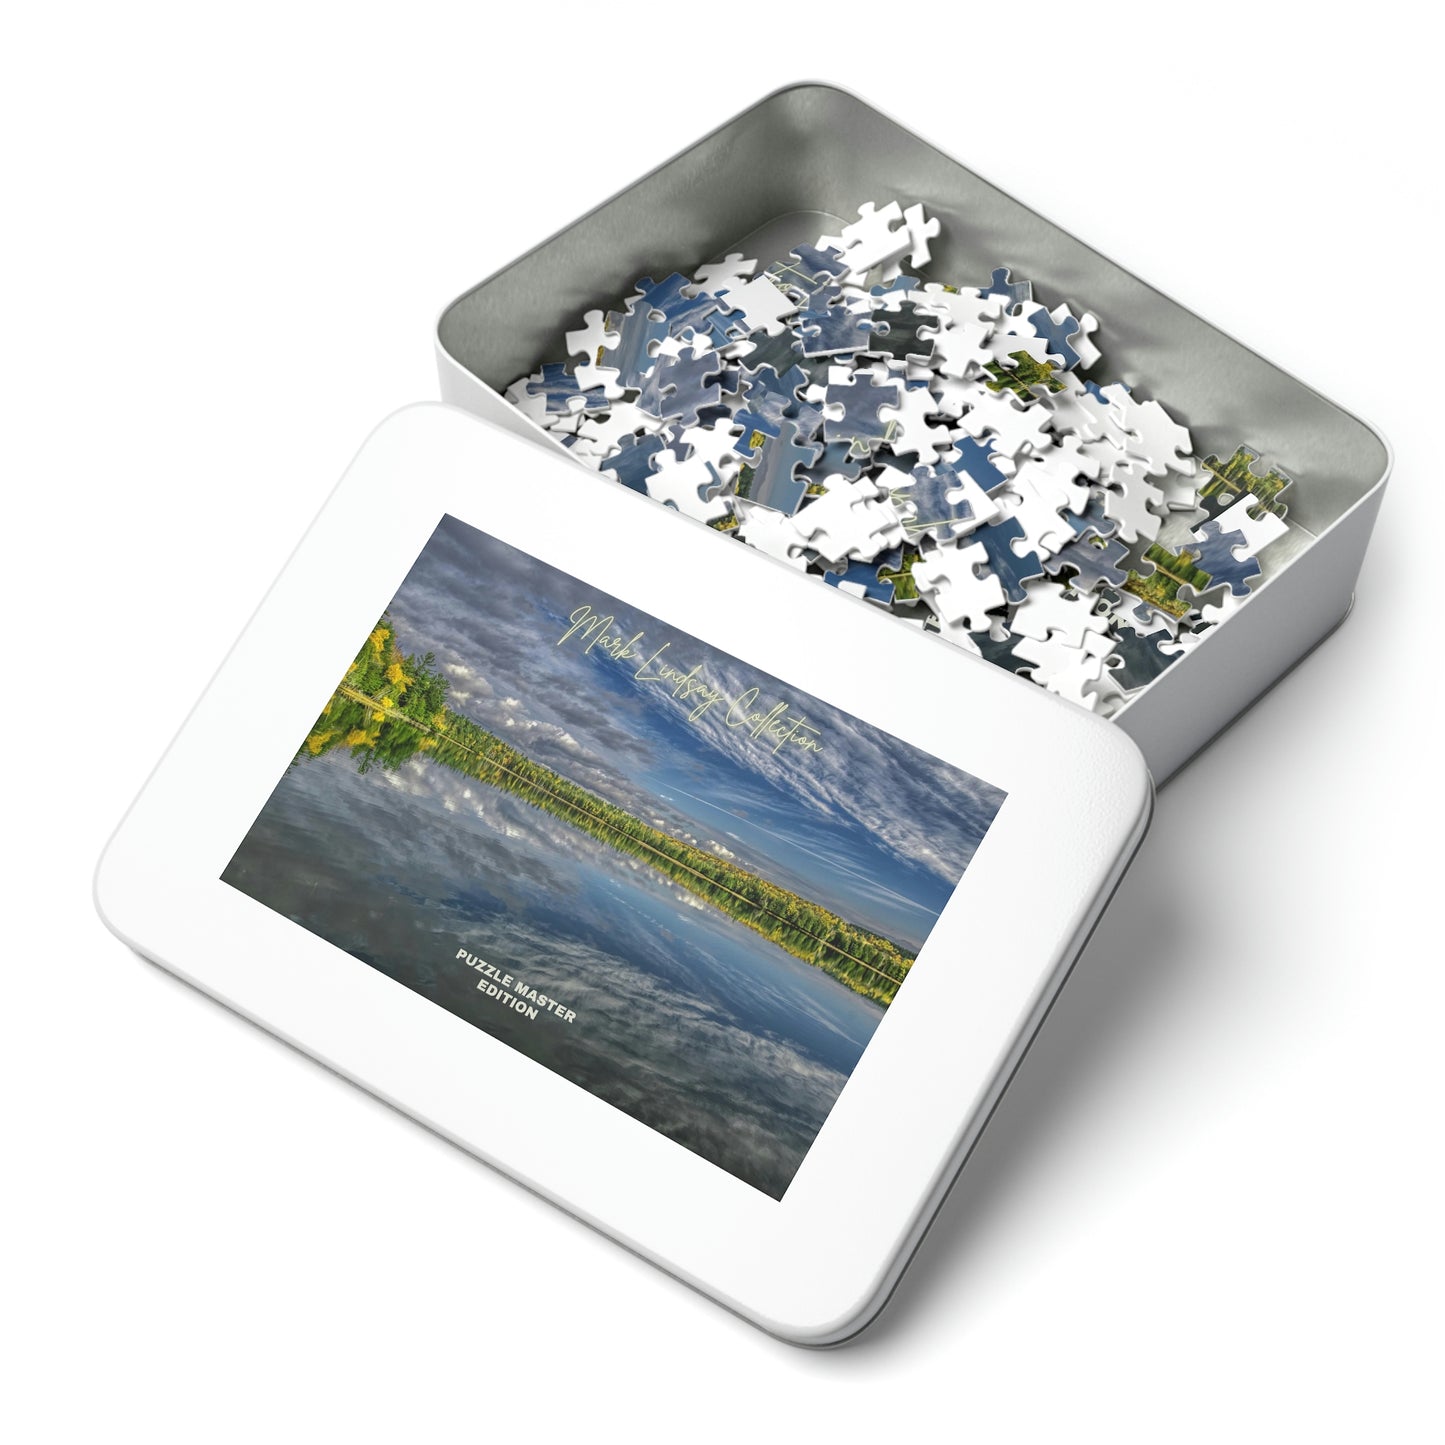 Reflections Jigsaw Puzzle Master (252, 500,1000-Piece)